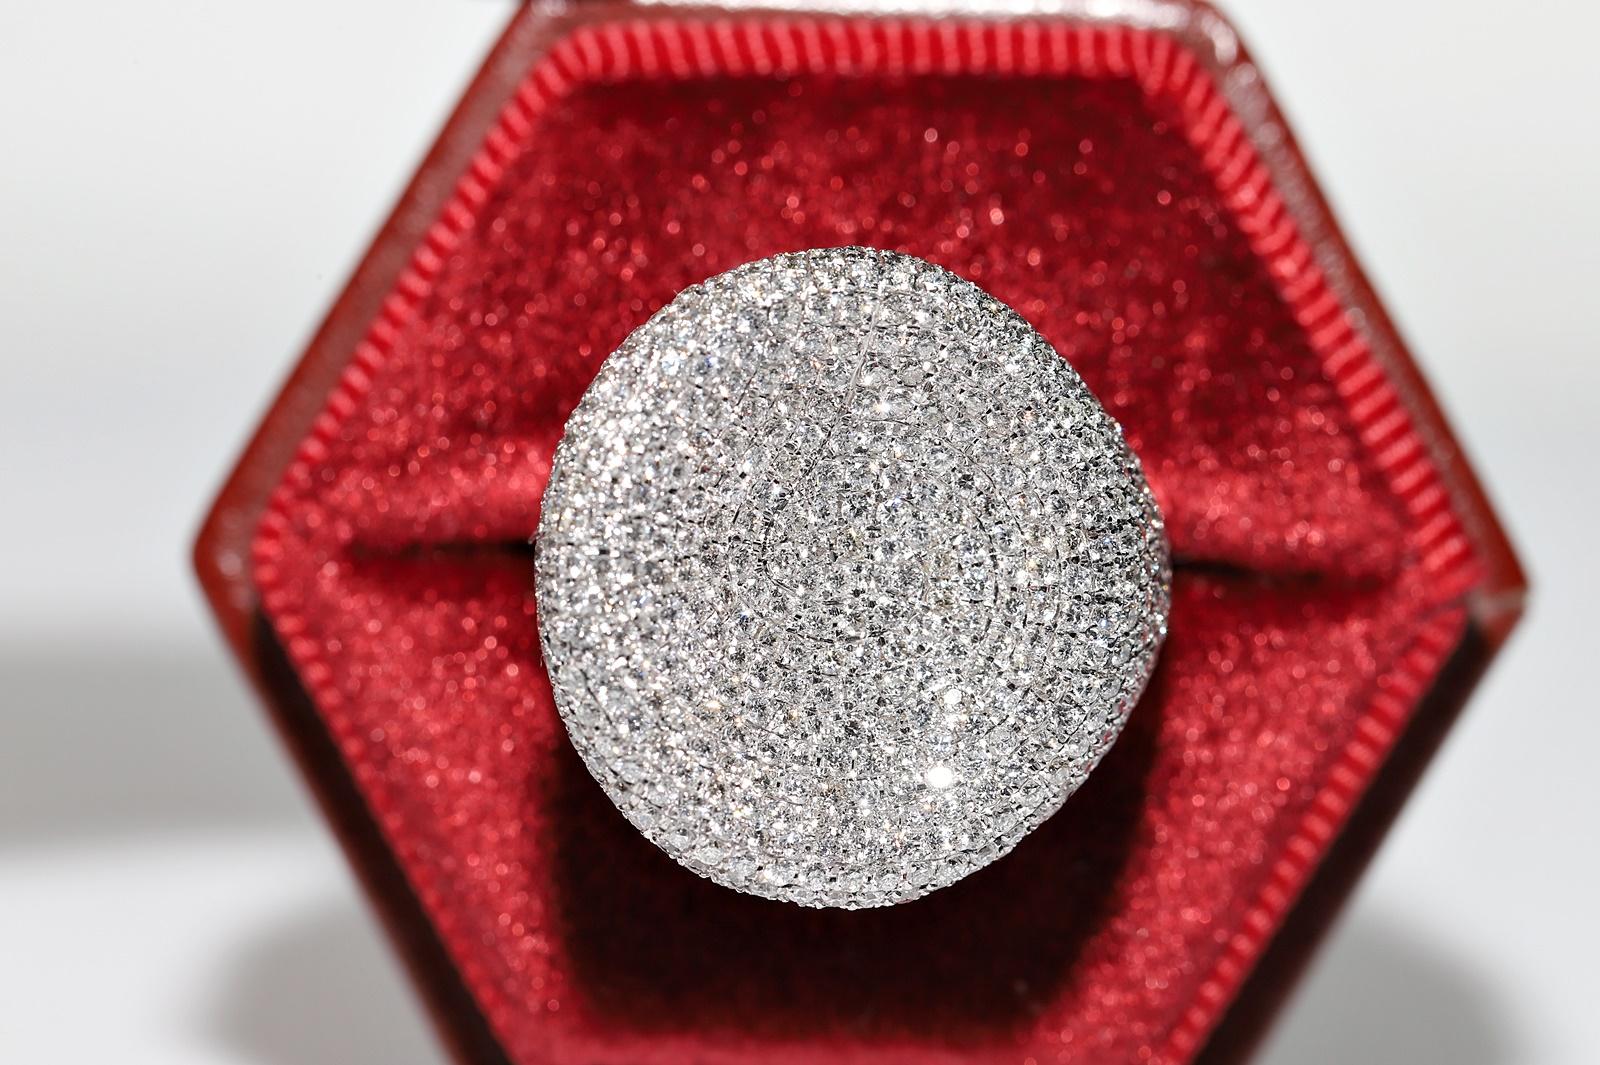 In very good condition.
Total weight is 14.3 grams.
Totally is diamond about 3.40 ct.
The diamond is has F-G color.
Ring size is US 6.75 (We offer free resizing)
We can make any size.
Box is not included.
Please contact for questions.